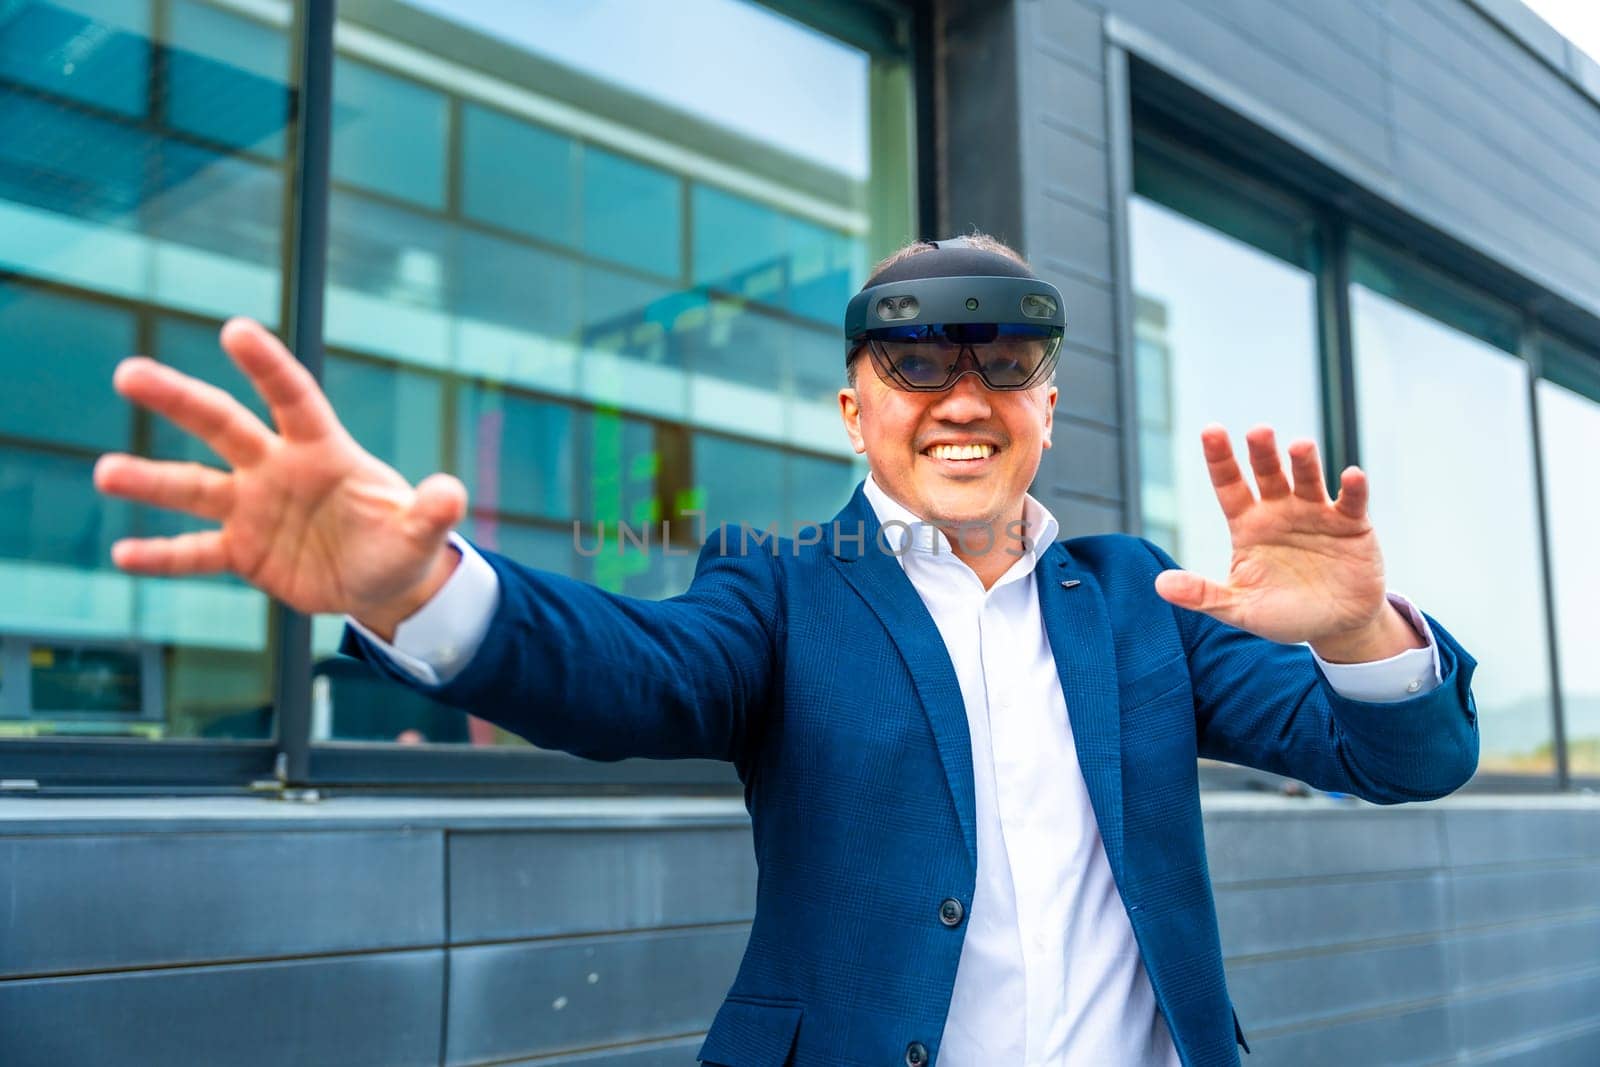 Businessman gesturing wearing augmented reality innovative goggles by Huizi